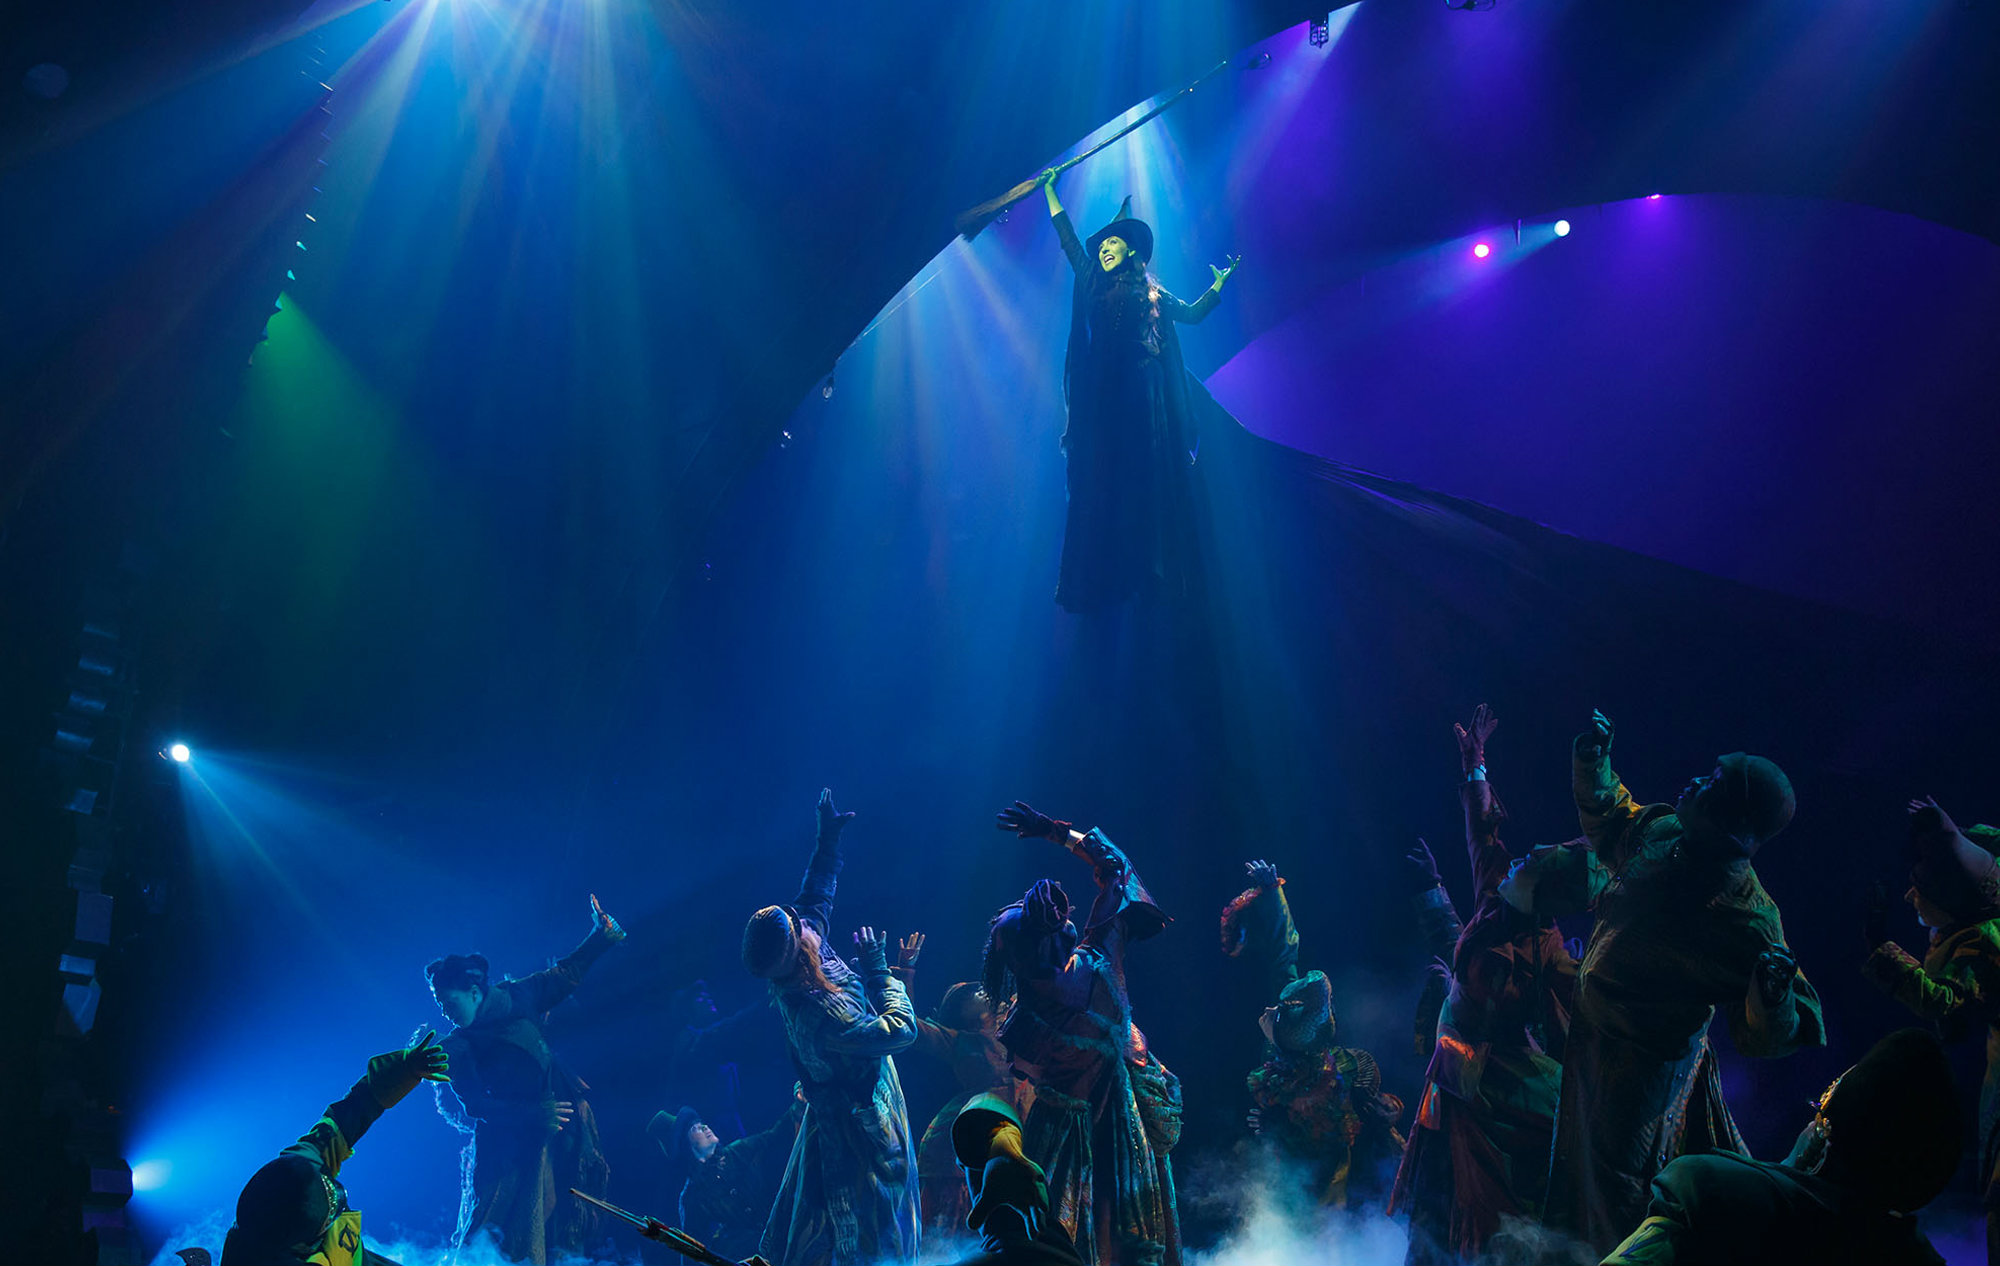 With a thrilling score that includes the hits Defying Gravity, Popular and For Good, Wicked has been referred to by The New York Times as “the defining musical of the decade.”